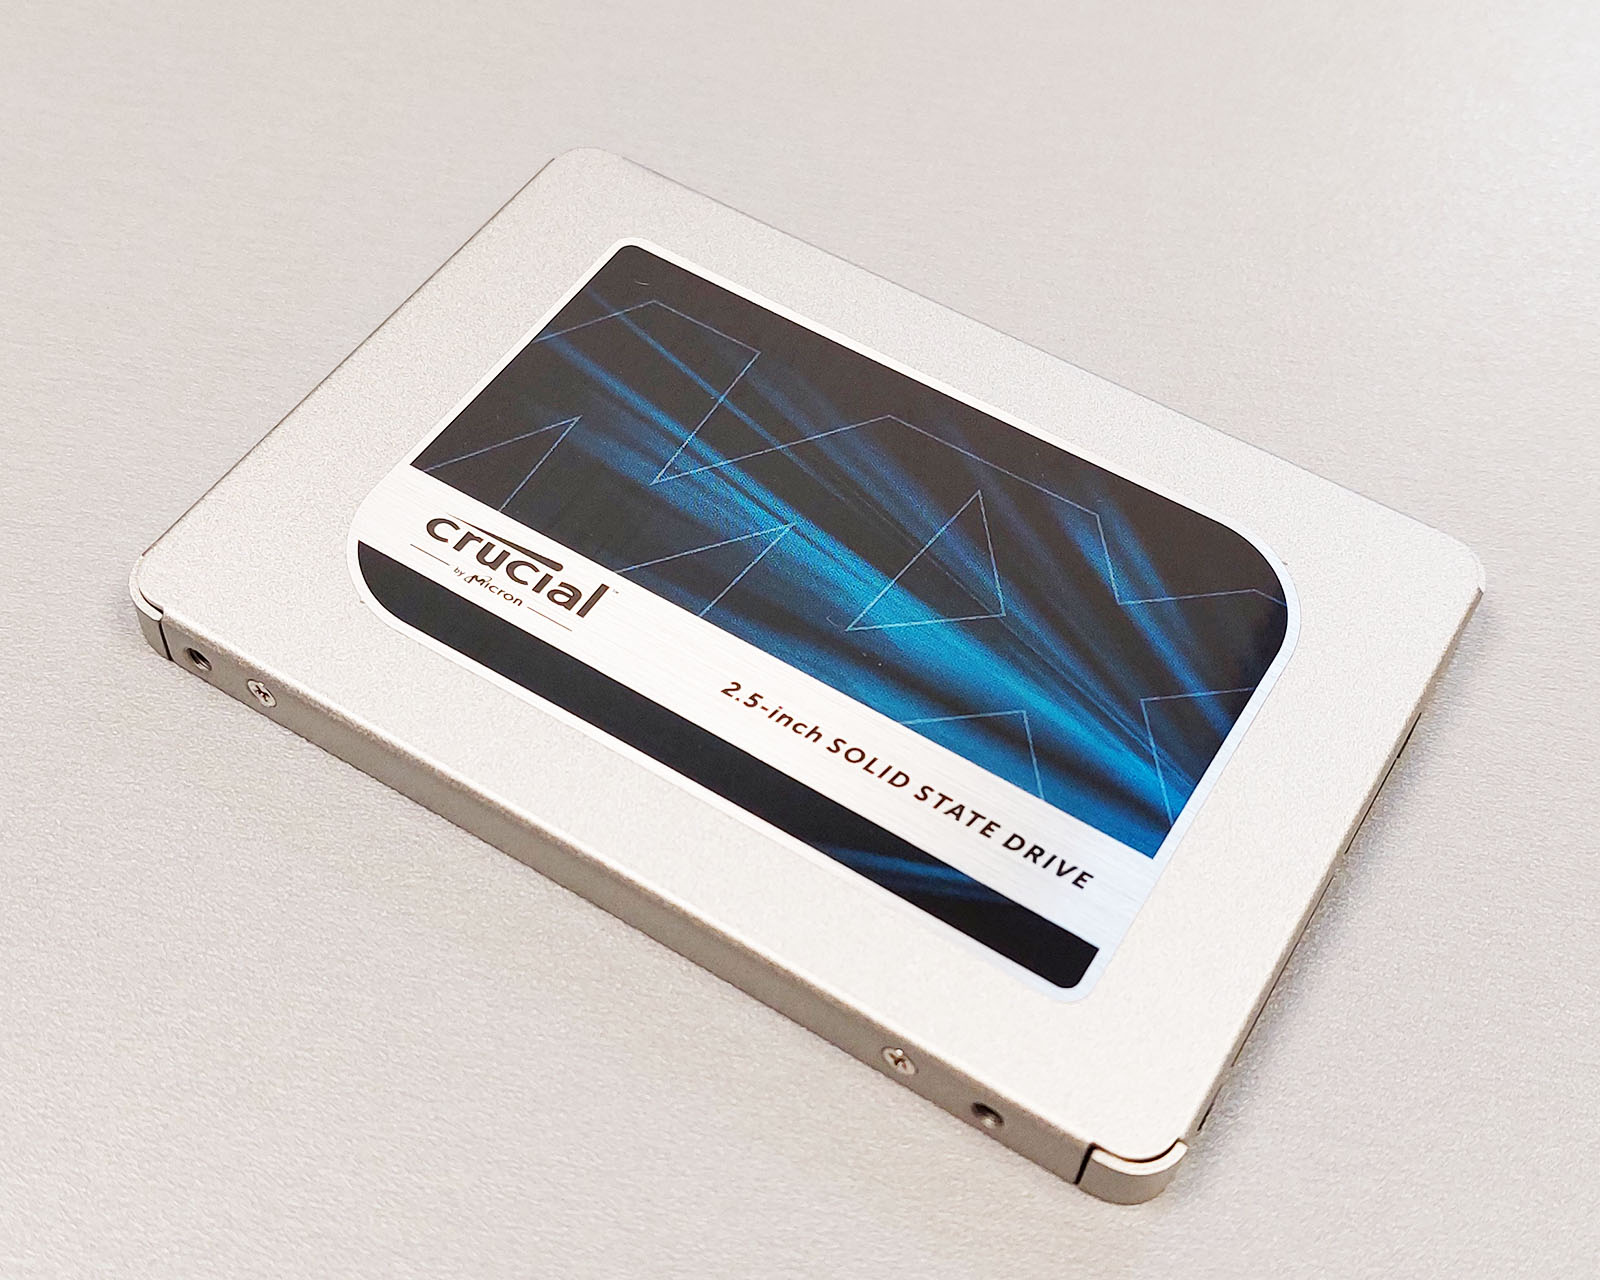 Crucial MX500 SSD review: Good, but not great storage for your PC